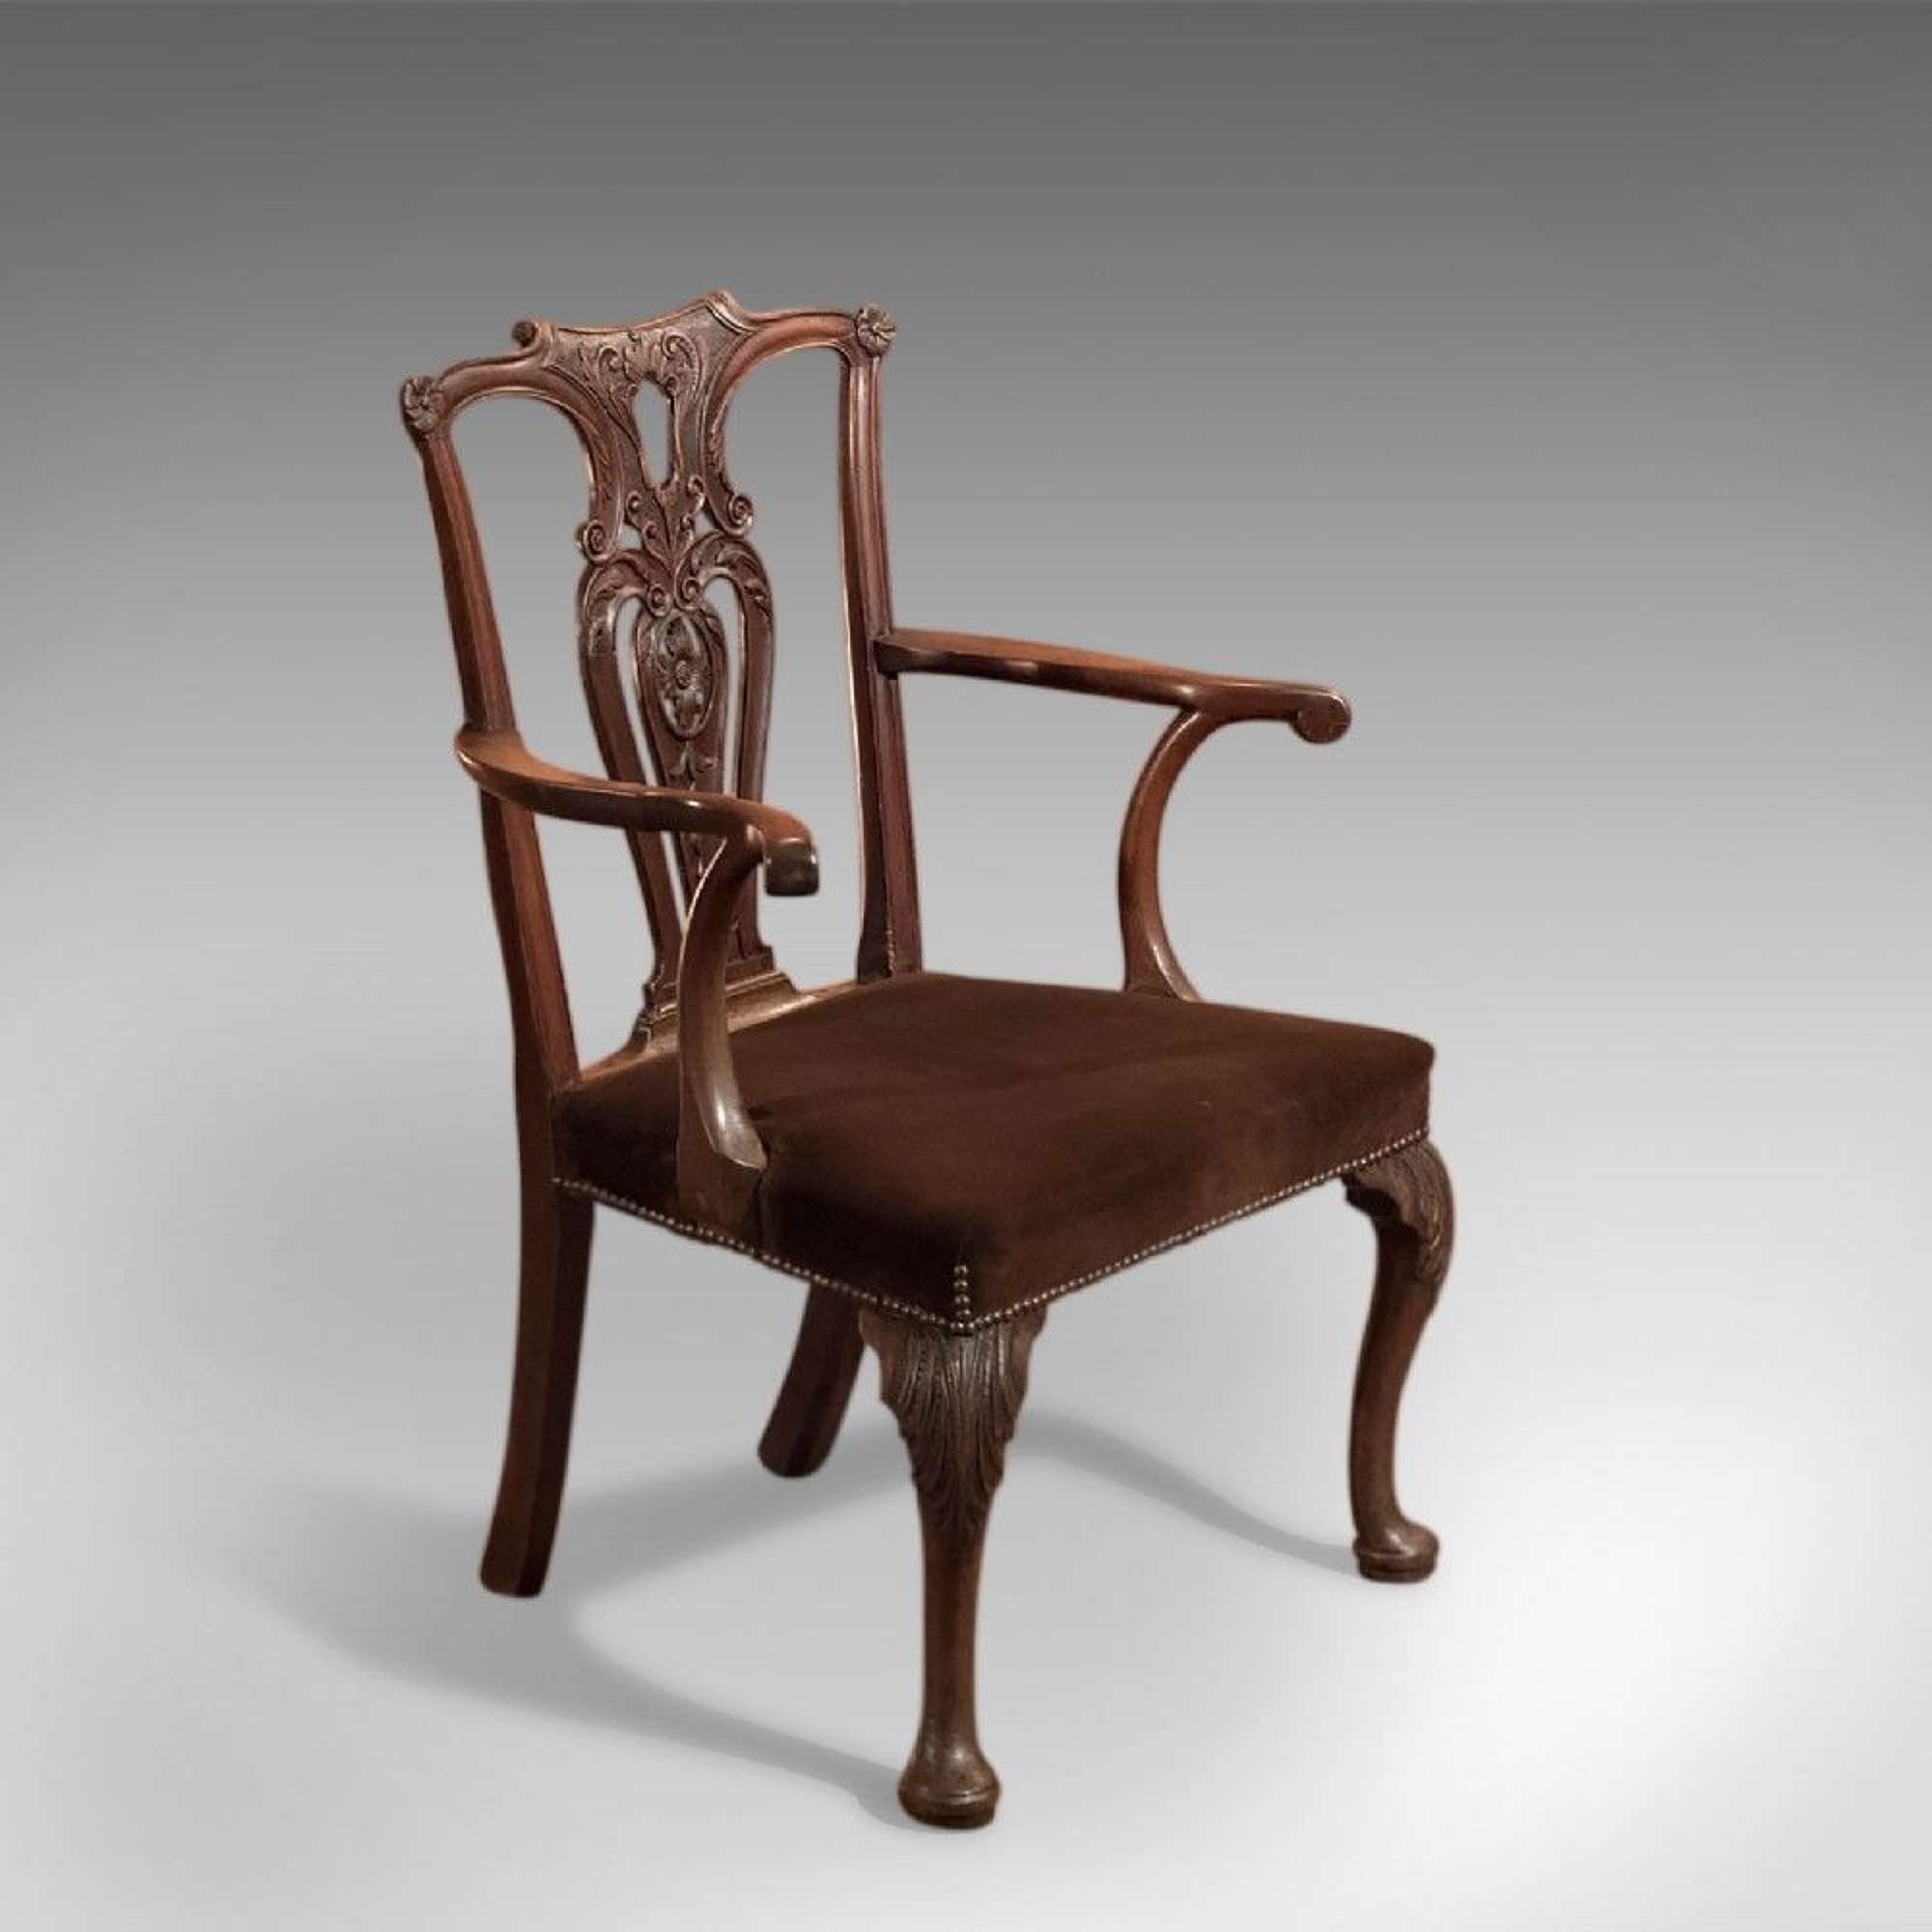 Antique Elbow Chair, 19th Century In Chippendale Taste